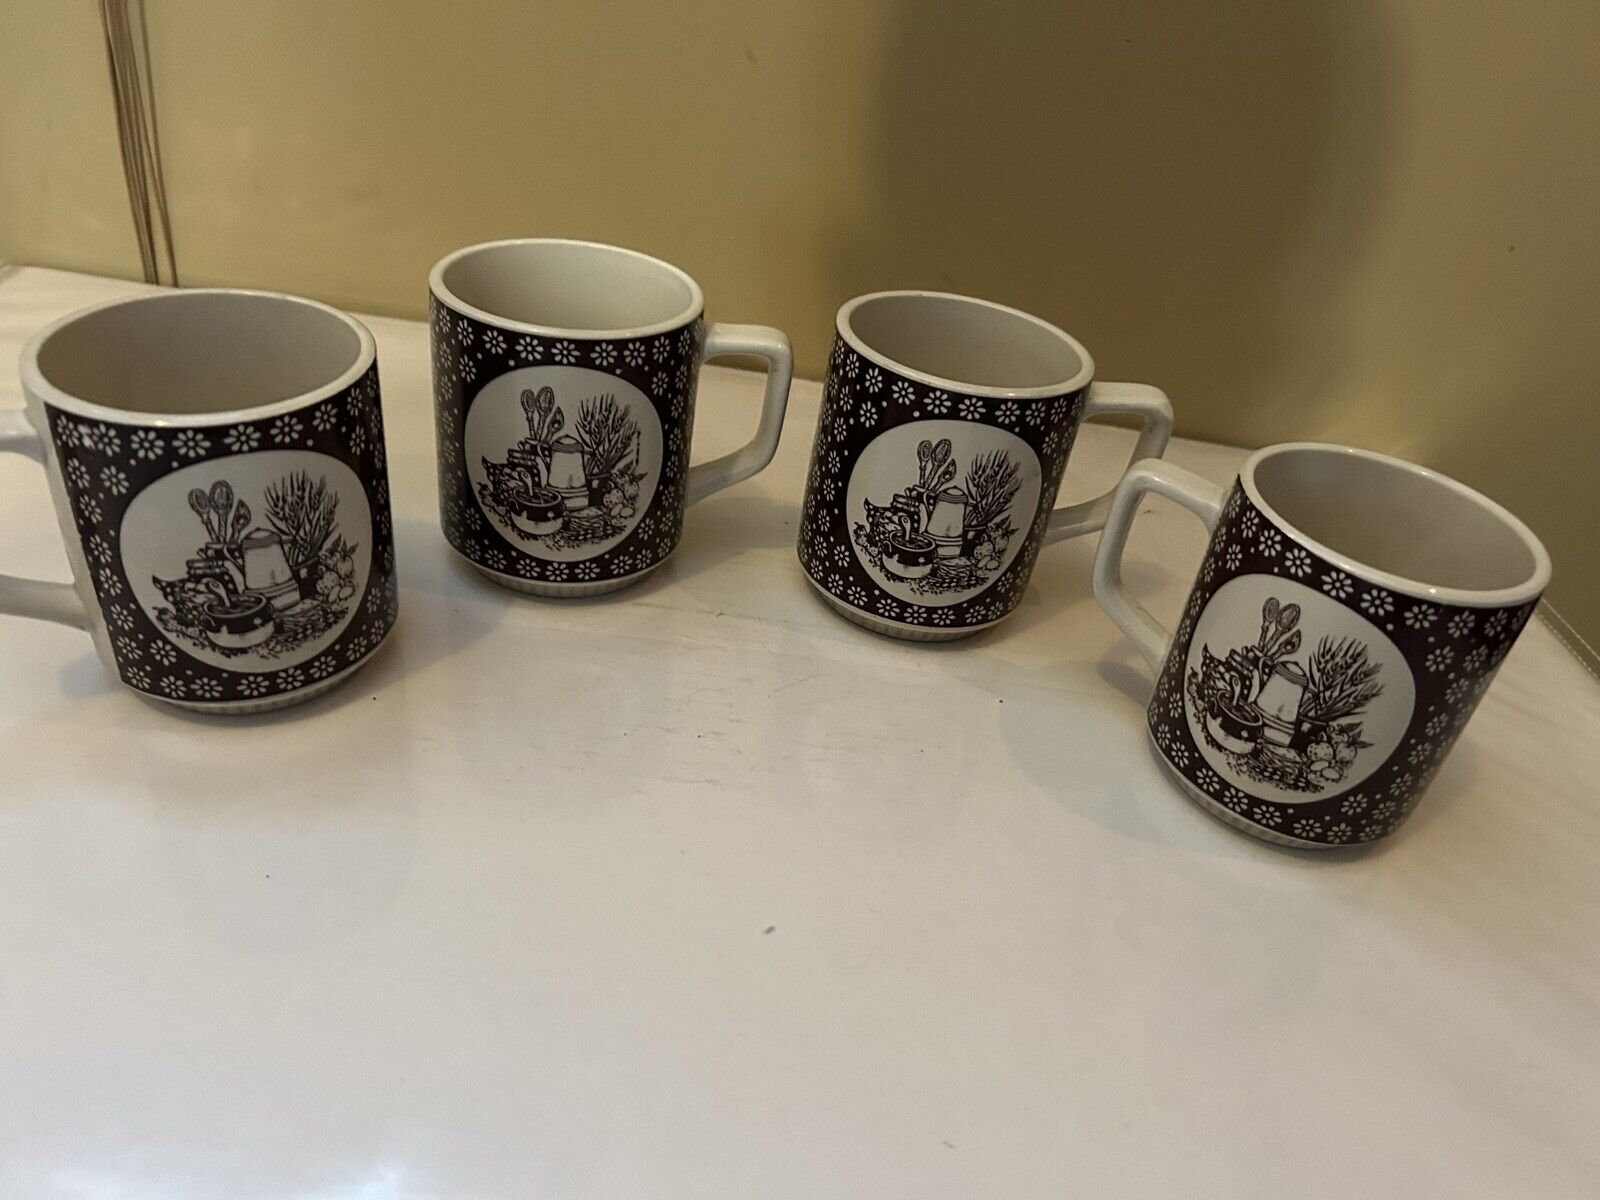 4 Vintage 1878 Enesco Country Kitchen Mugs With Image Tan/Brown